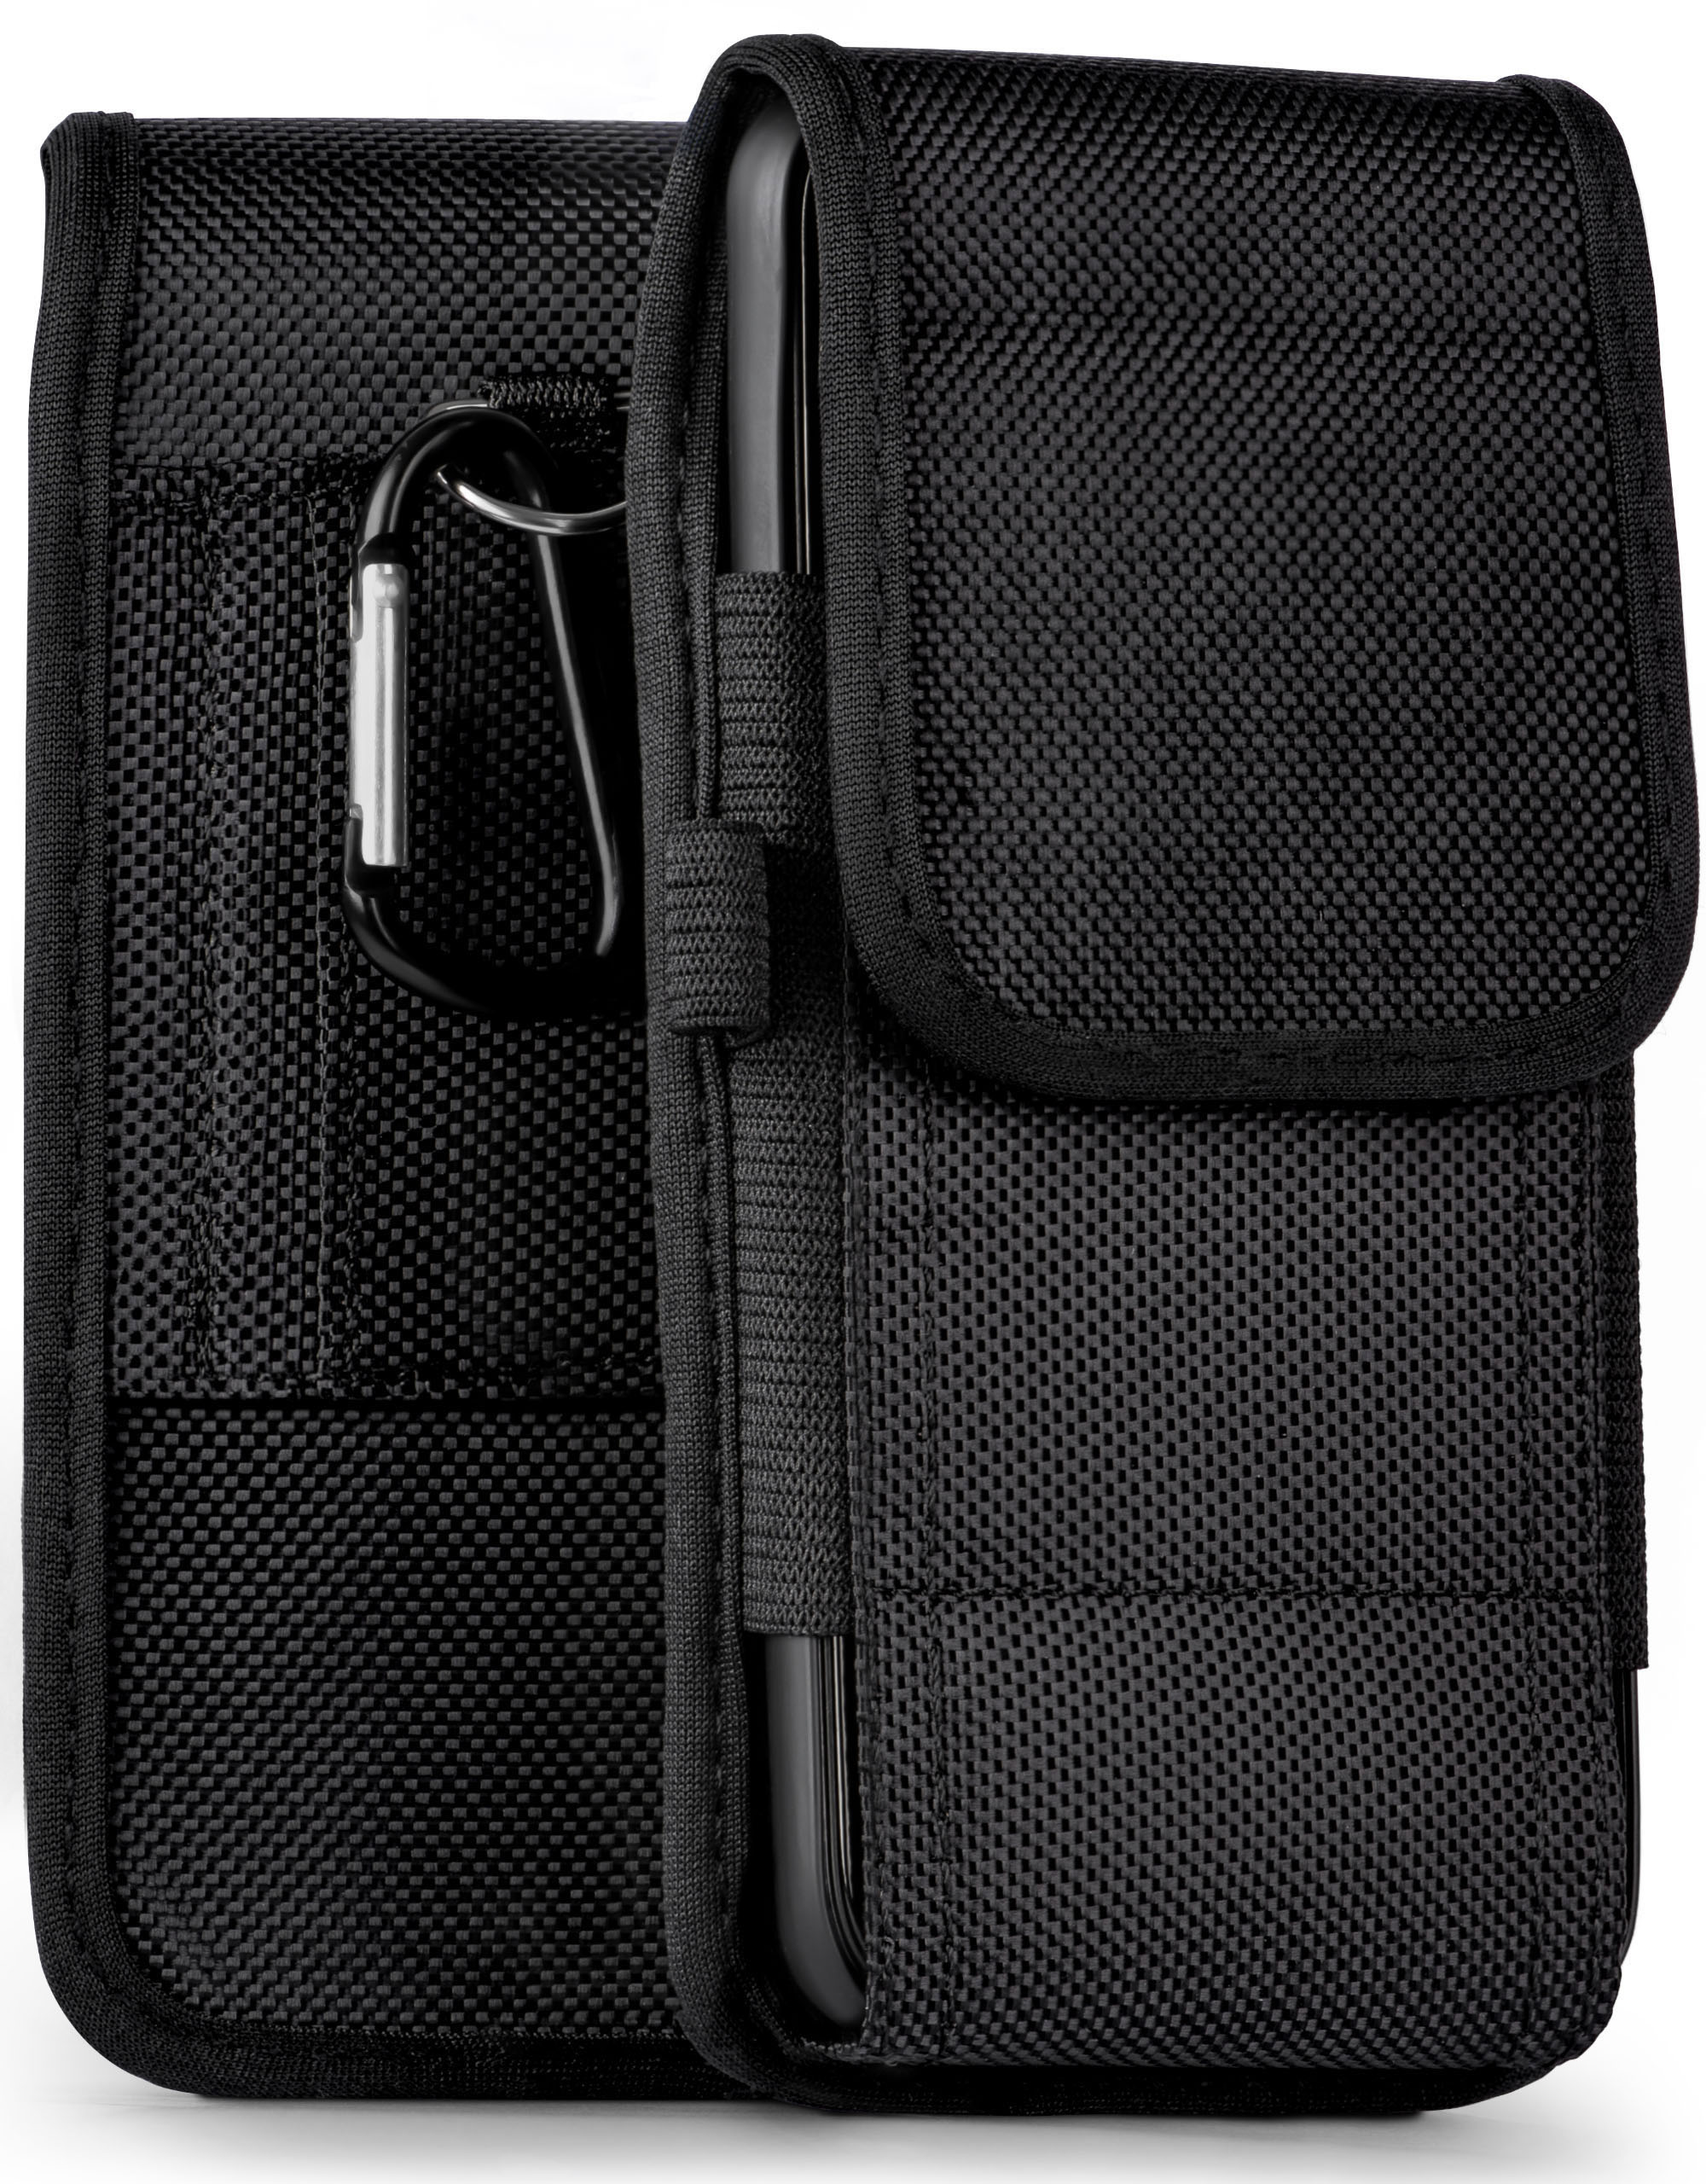 Case, Trail Holster, Agility GS195, Gigaset, MOEX